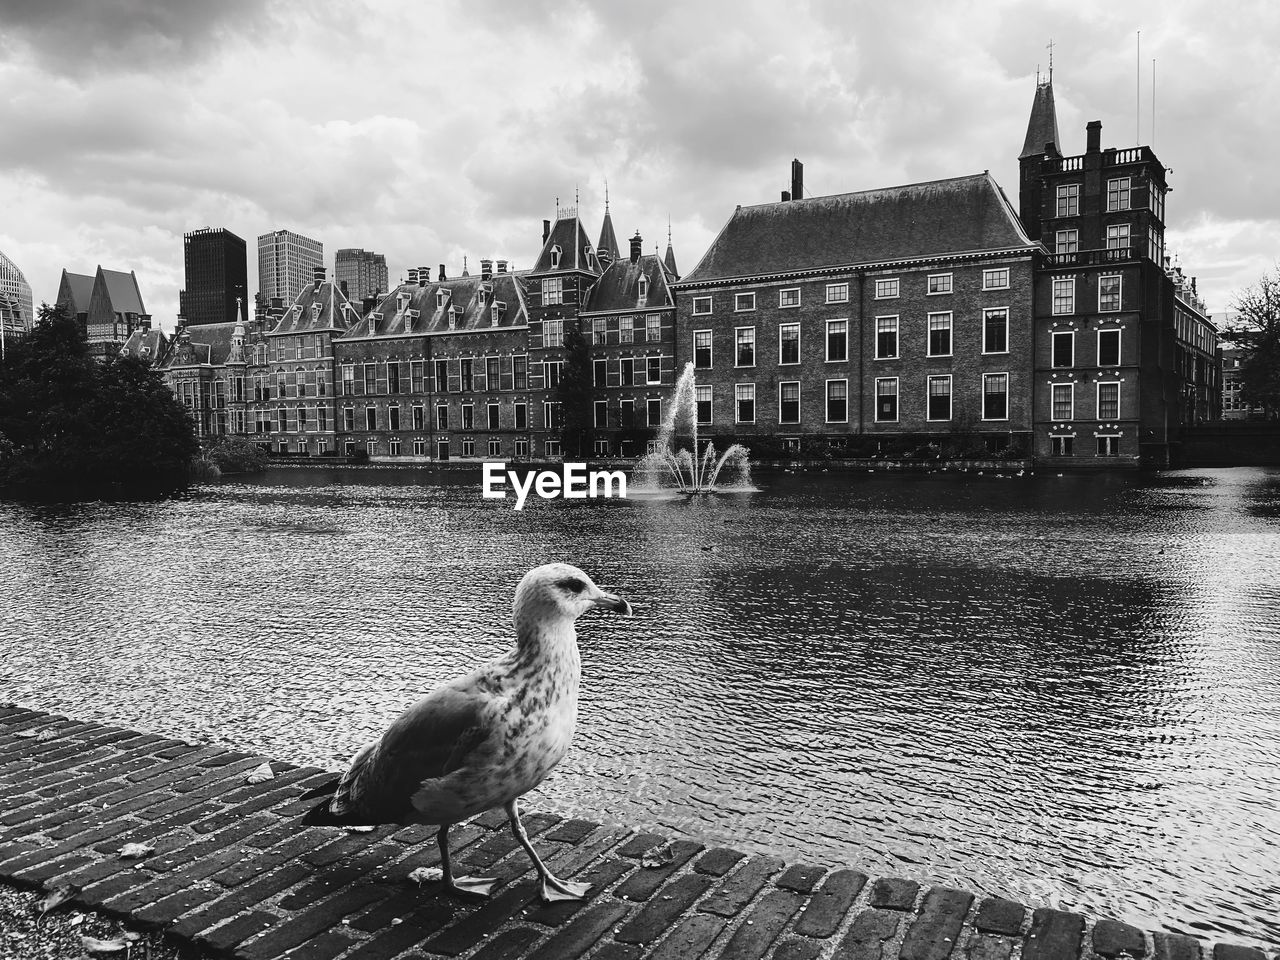 VIEW OF SEAGULL BY RIVER IN CITY